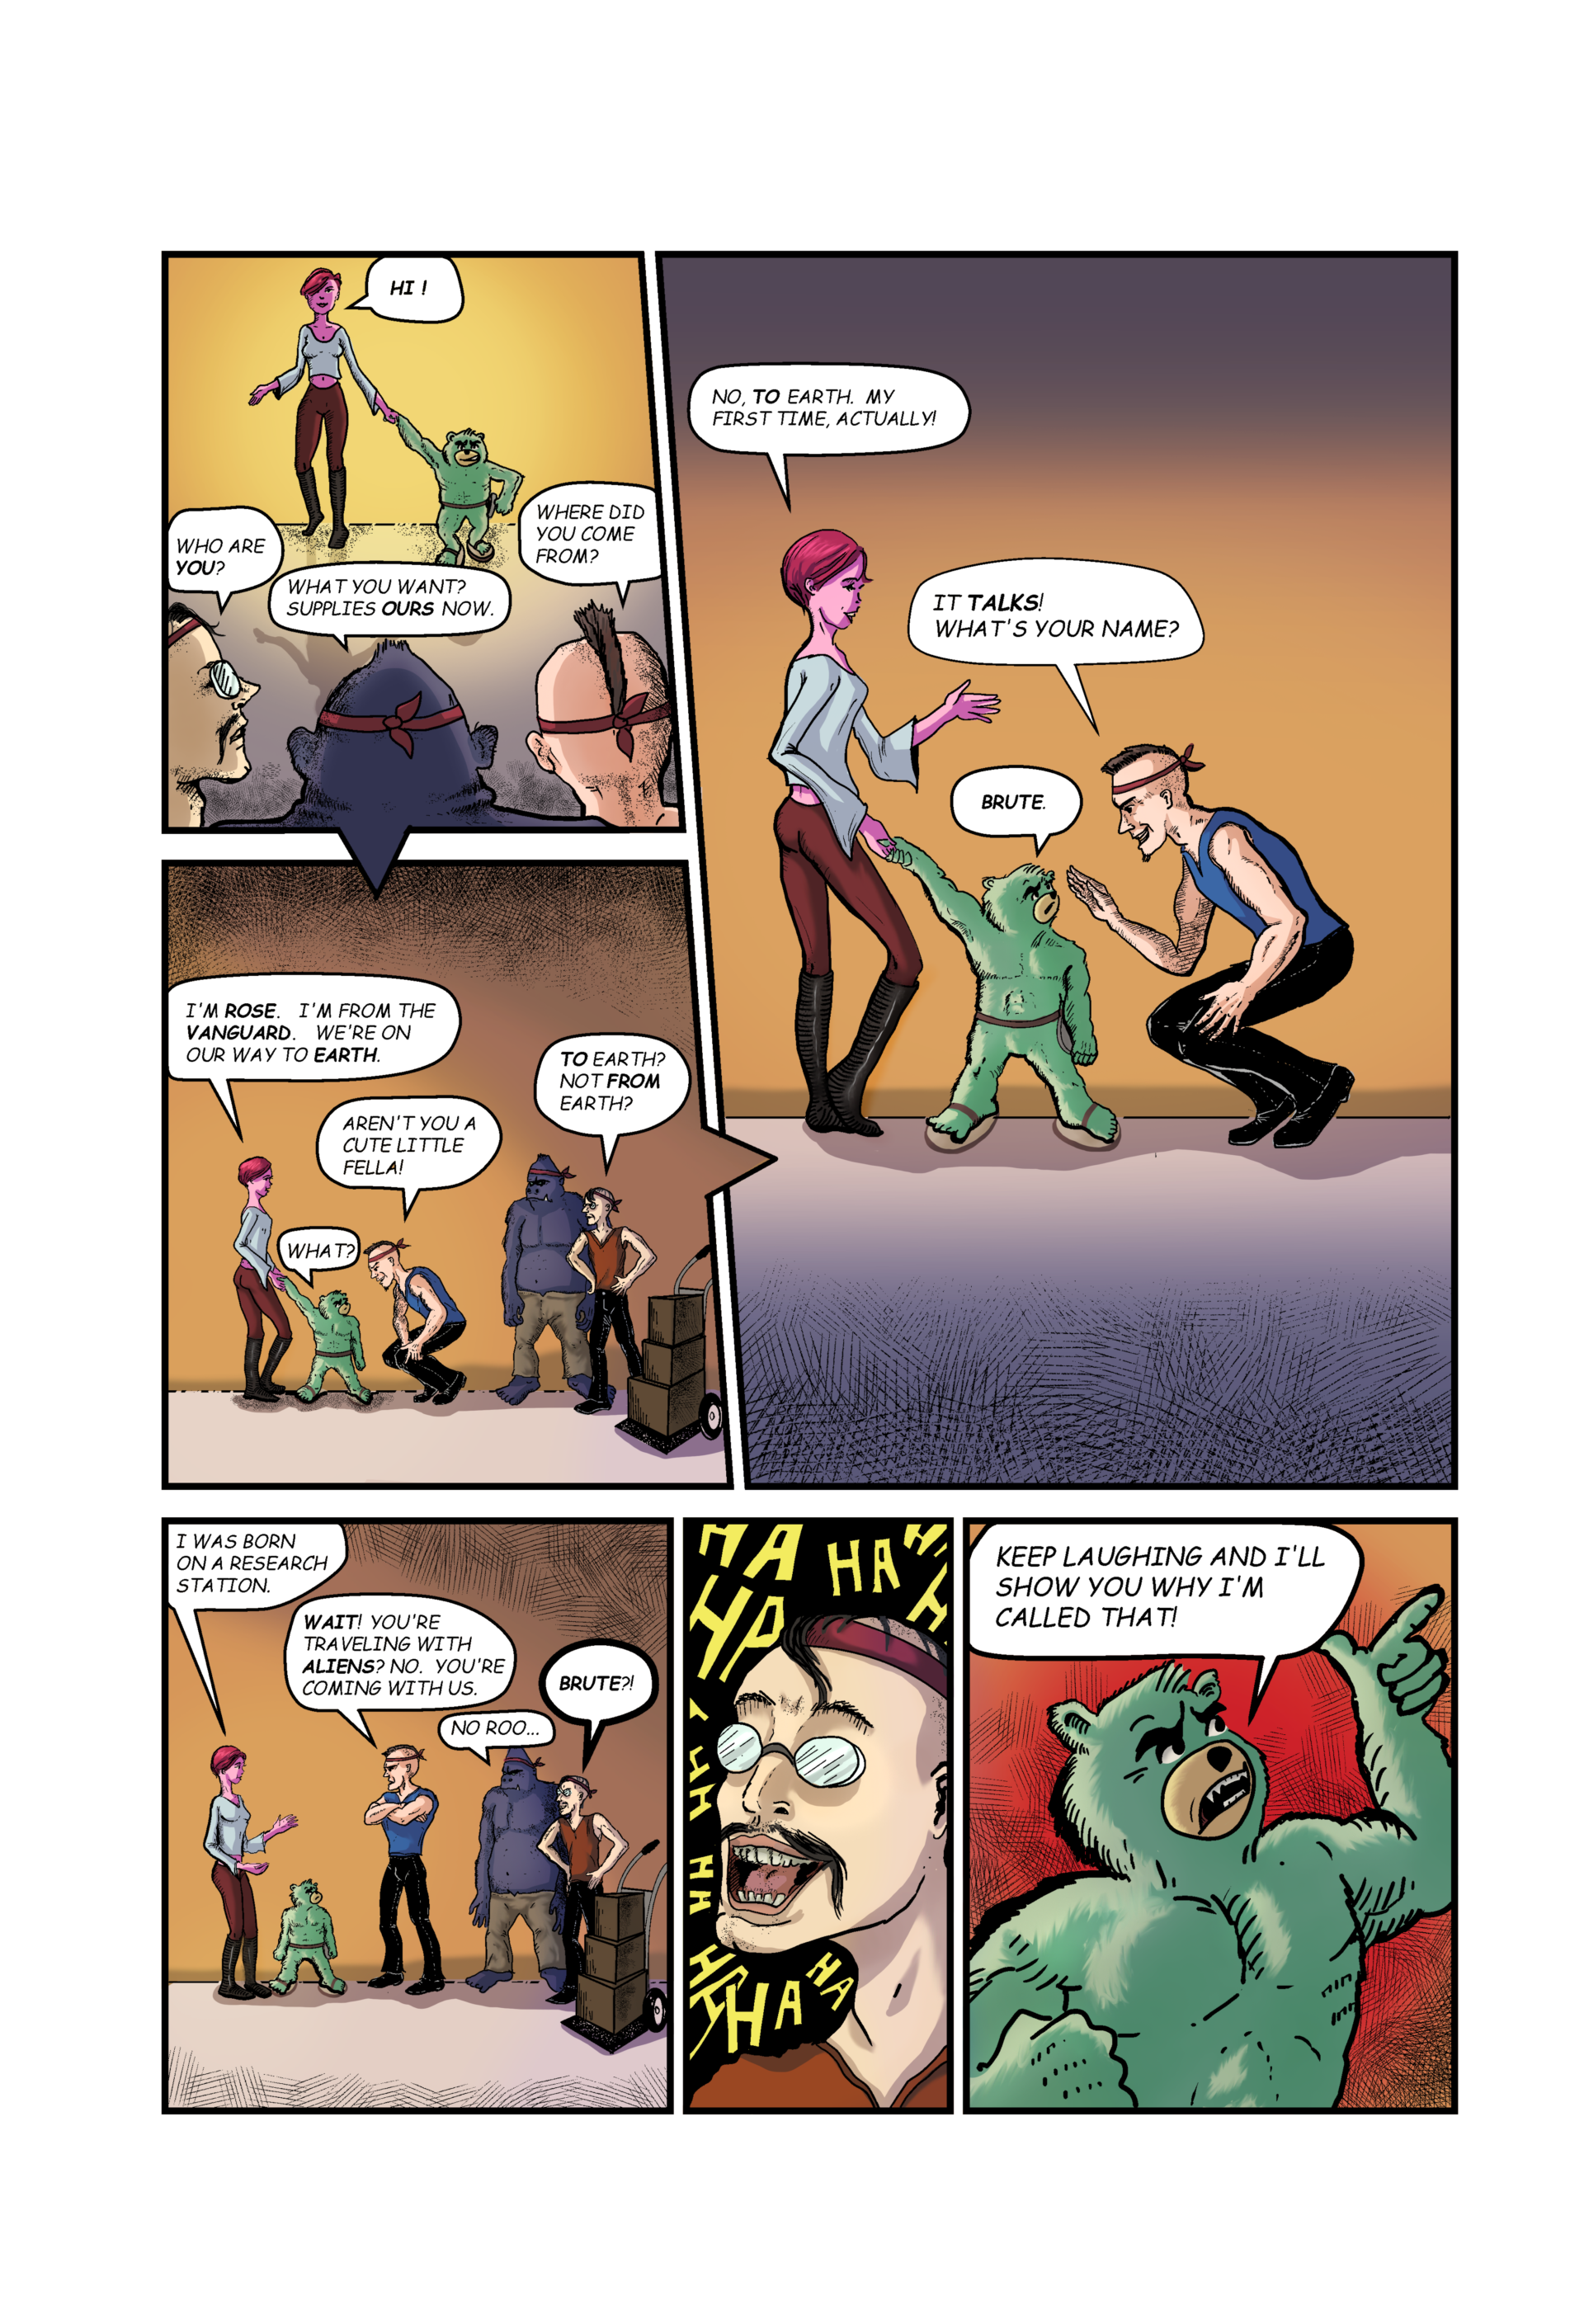 Brute - Supply Run - Page 4